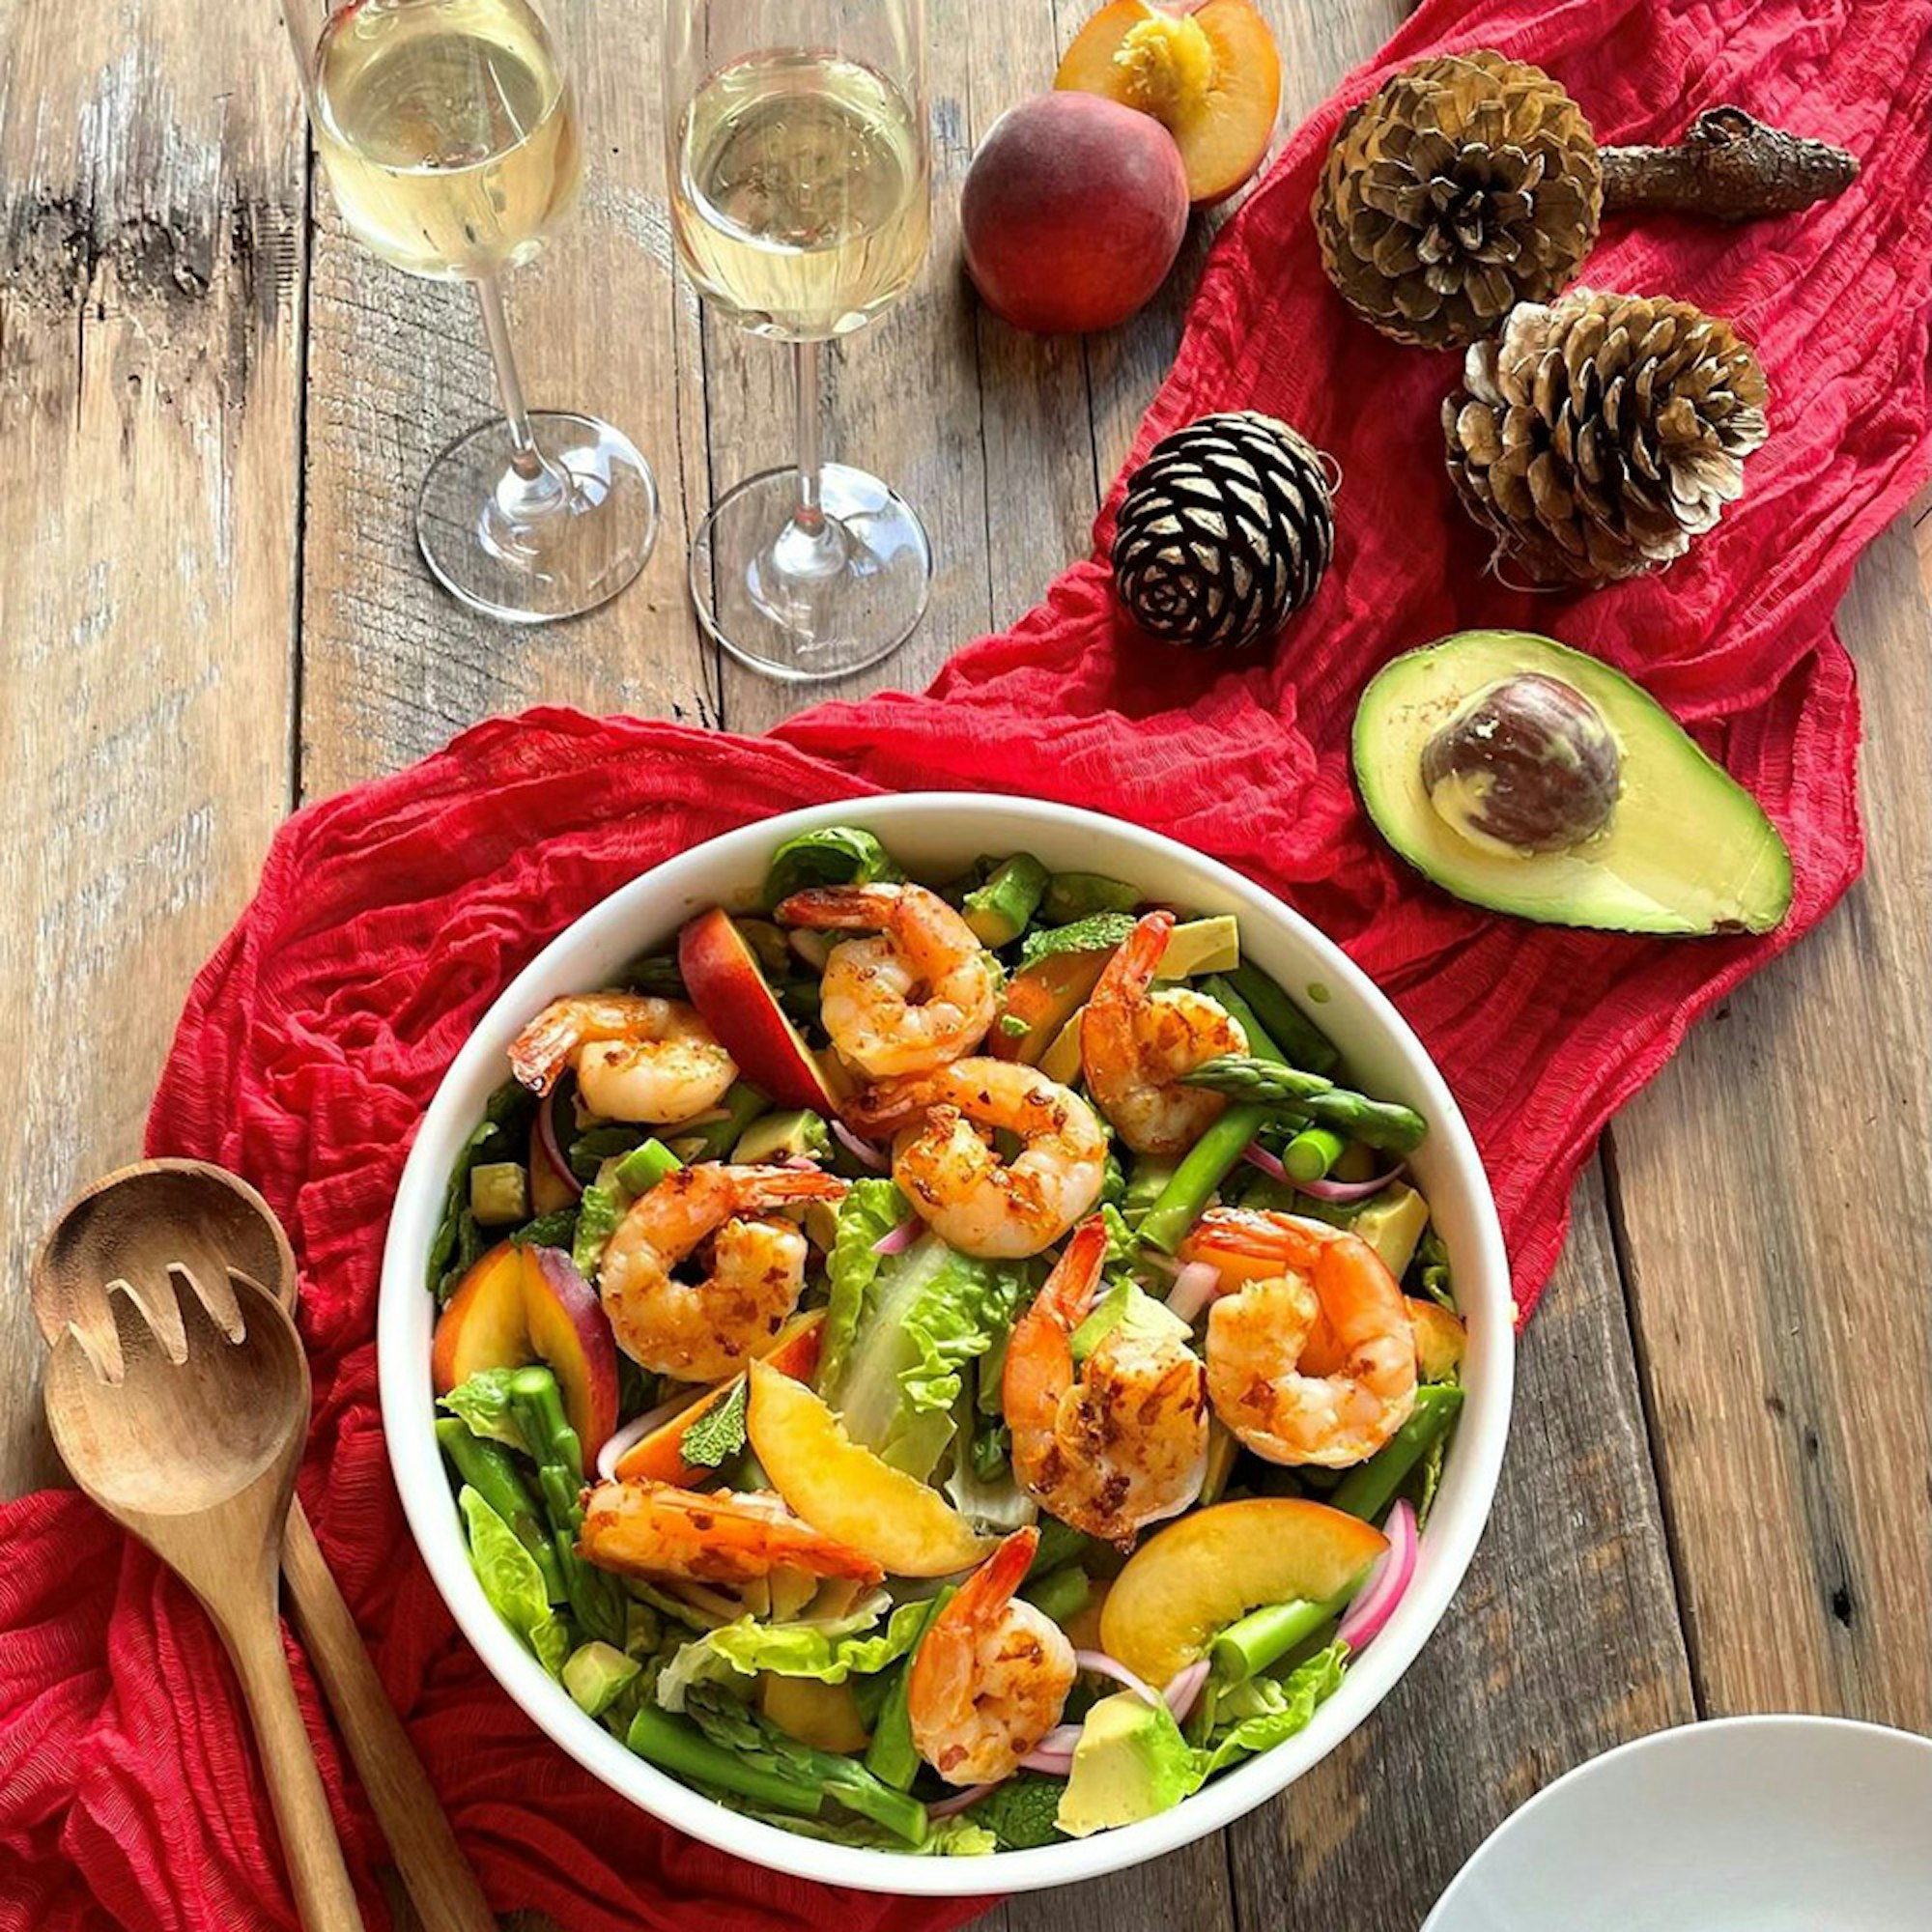 Grilled Prawns and Peach Salad with a Citrus Vinaigrette Recipe